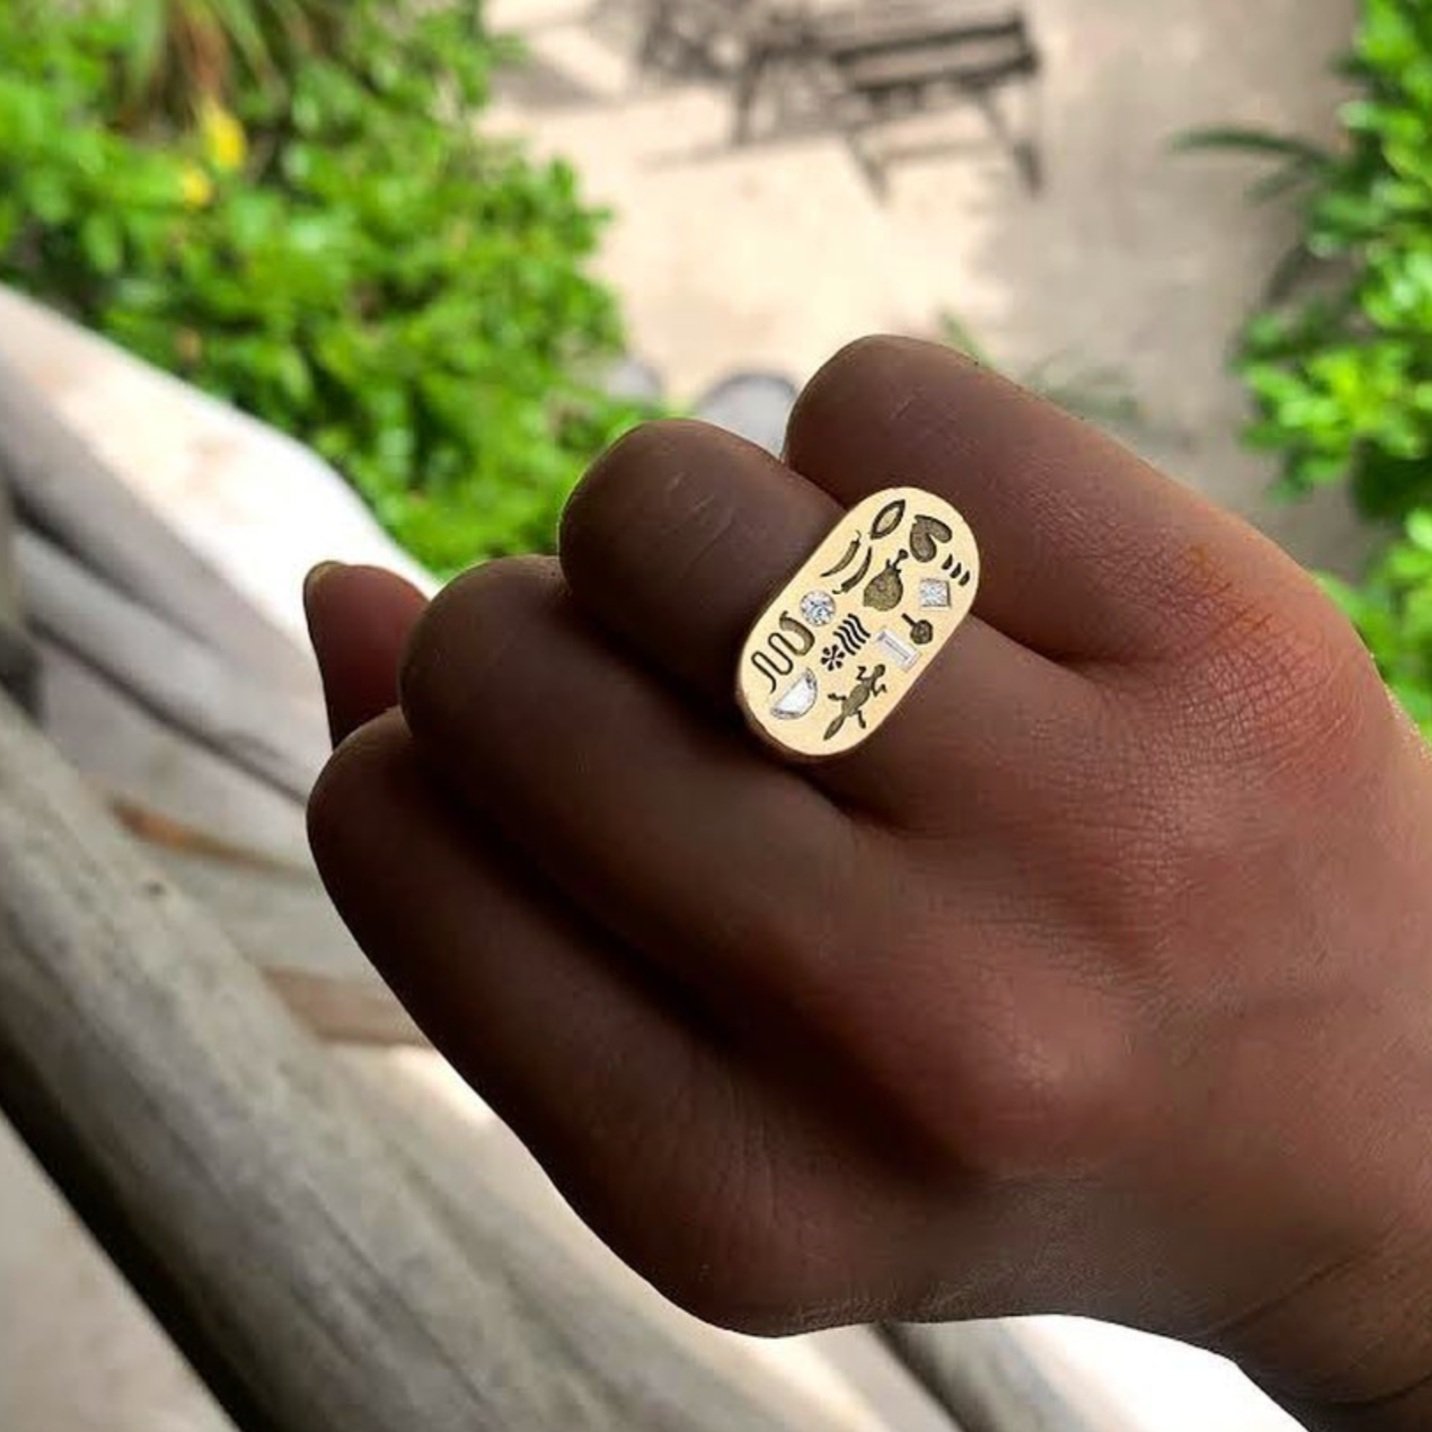 Jewelry that makes Sarah feel strong: her Loverglyphs ring